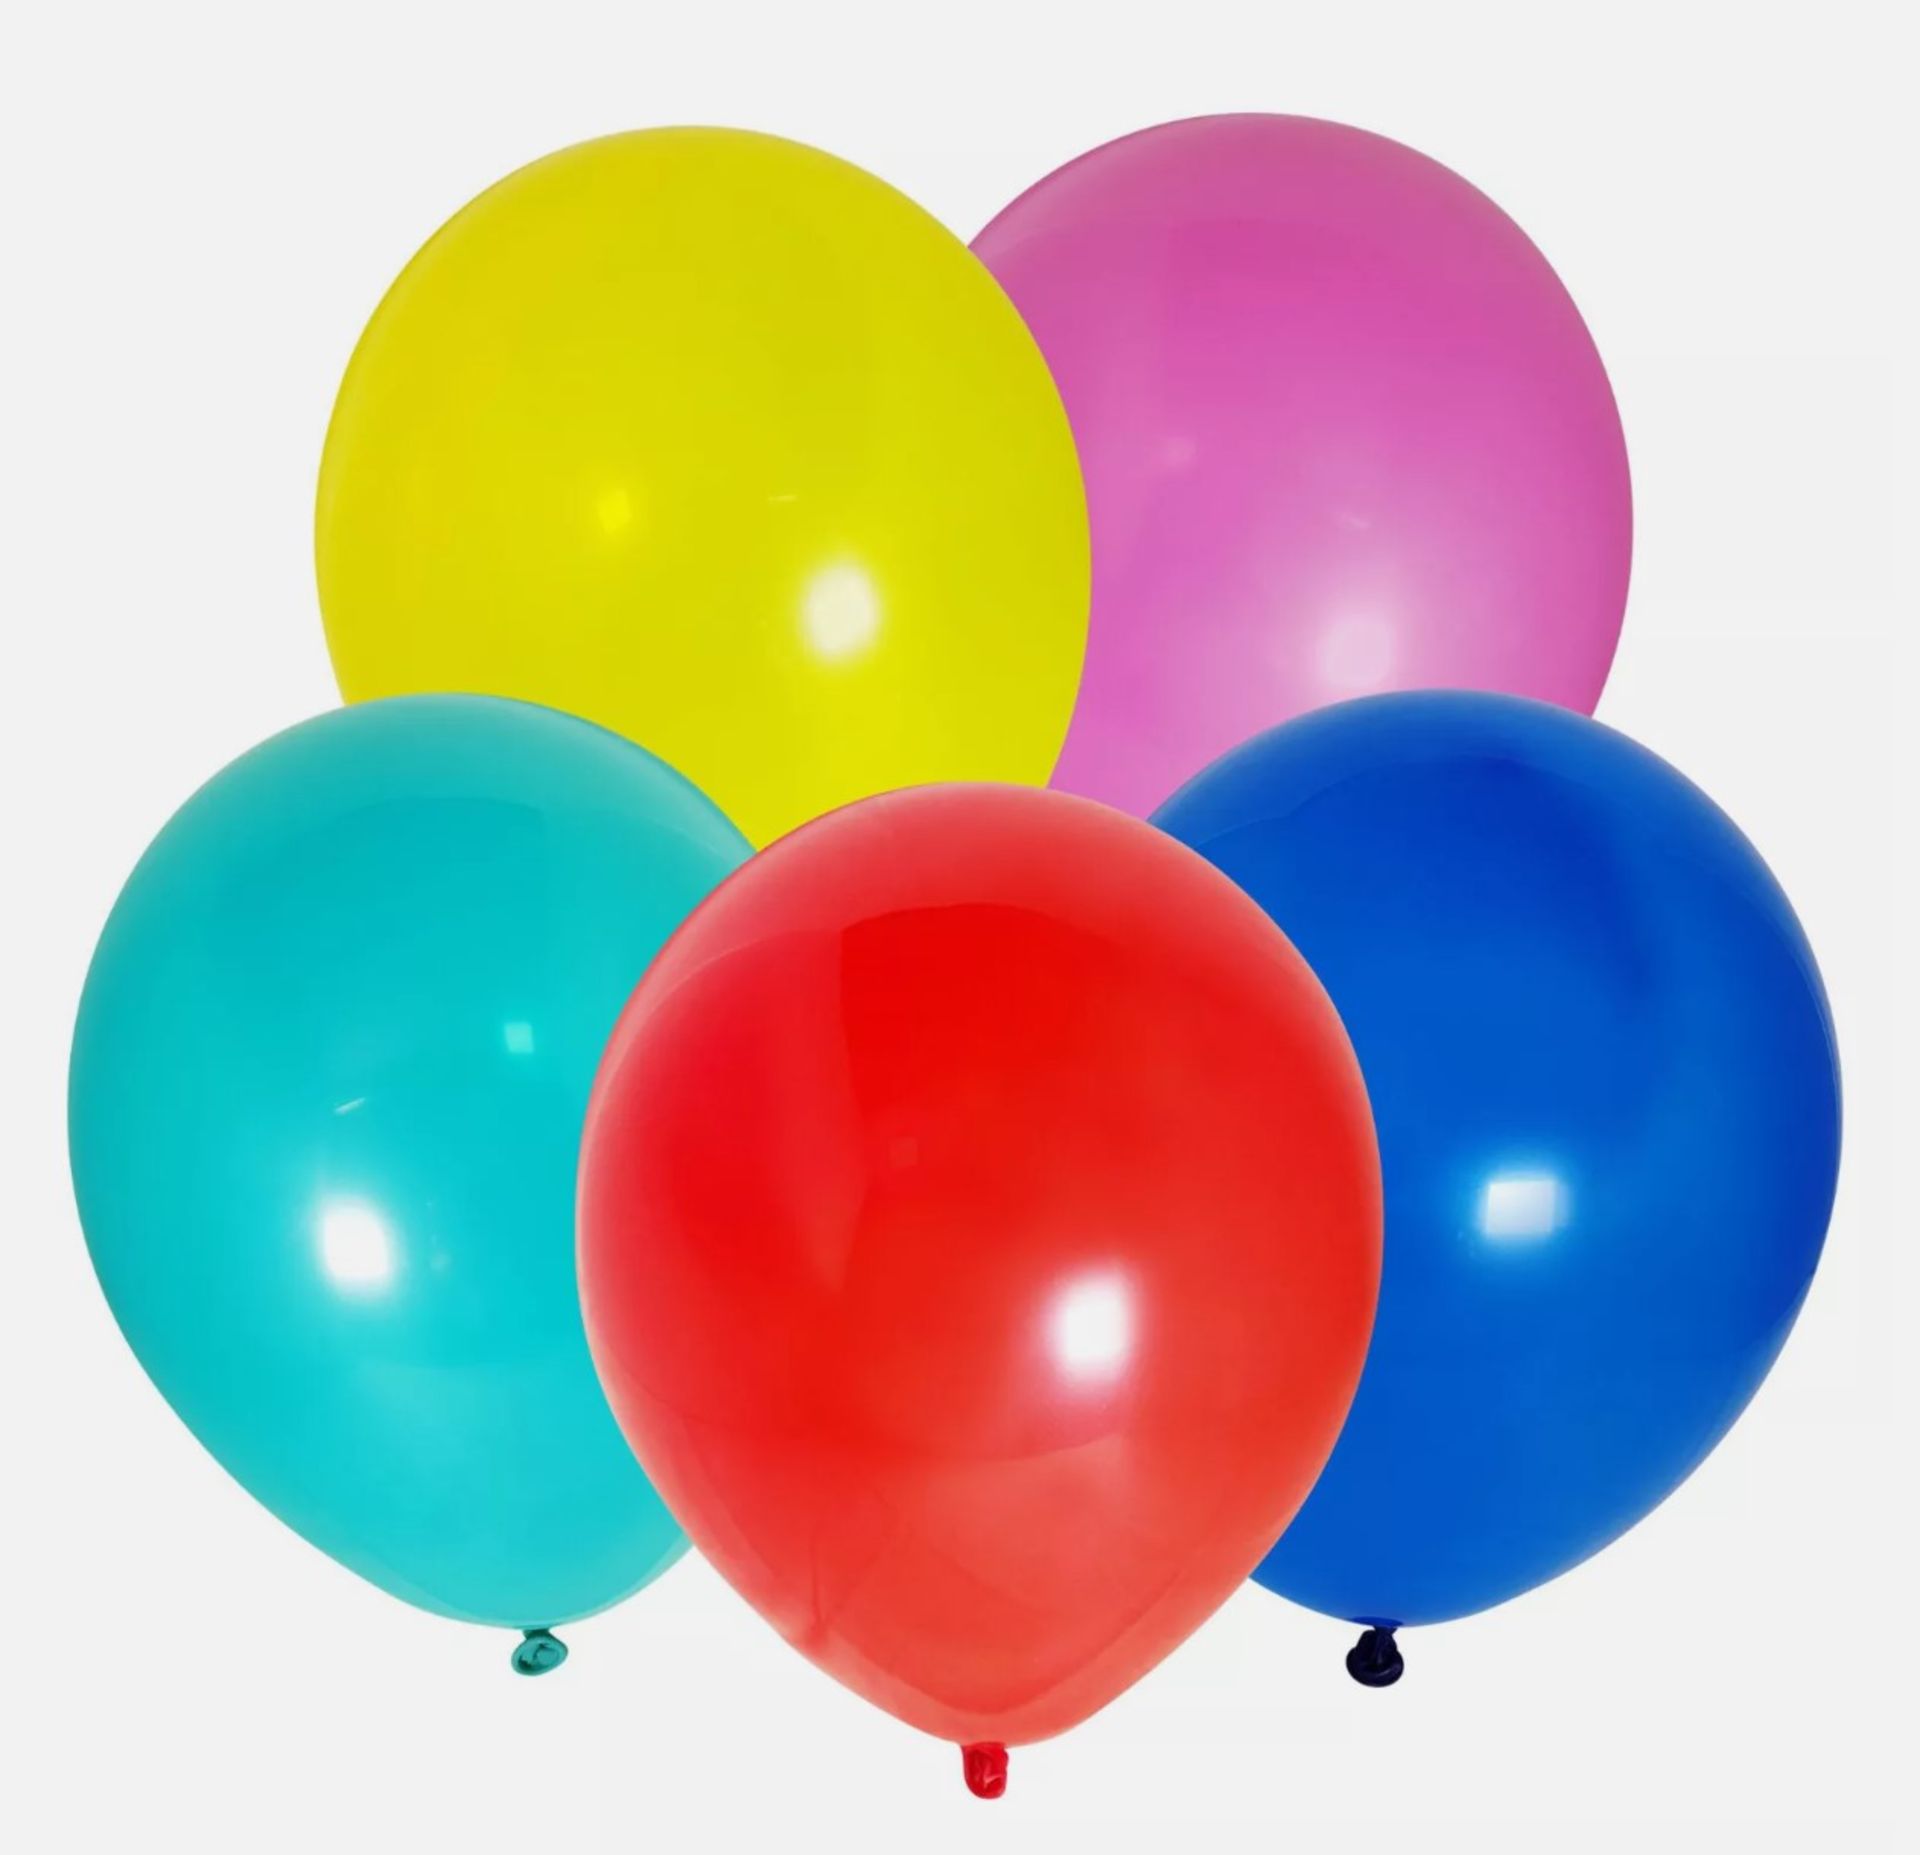 1500 X NEW 9"&6" - 24 PACK ASSORTED COLOURED BALLOONS - Image 4 of 4